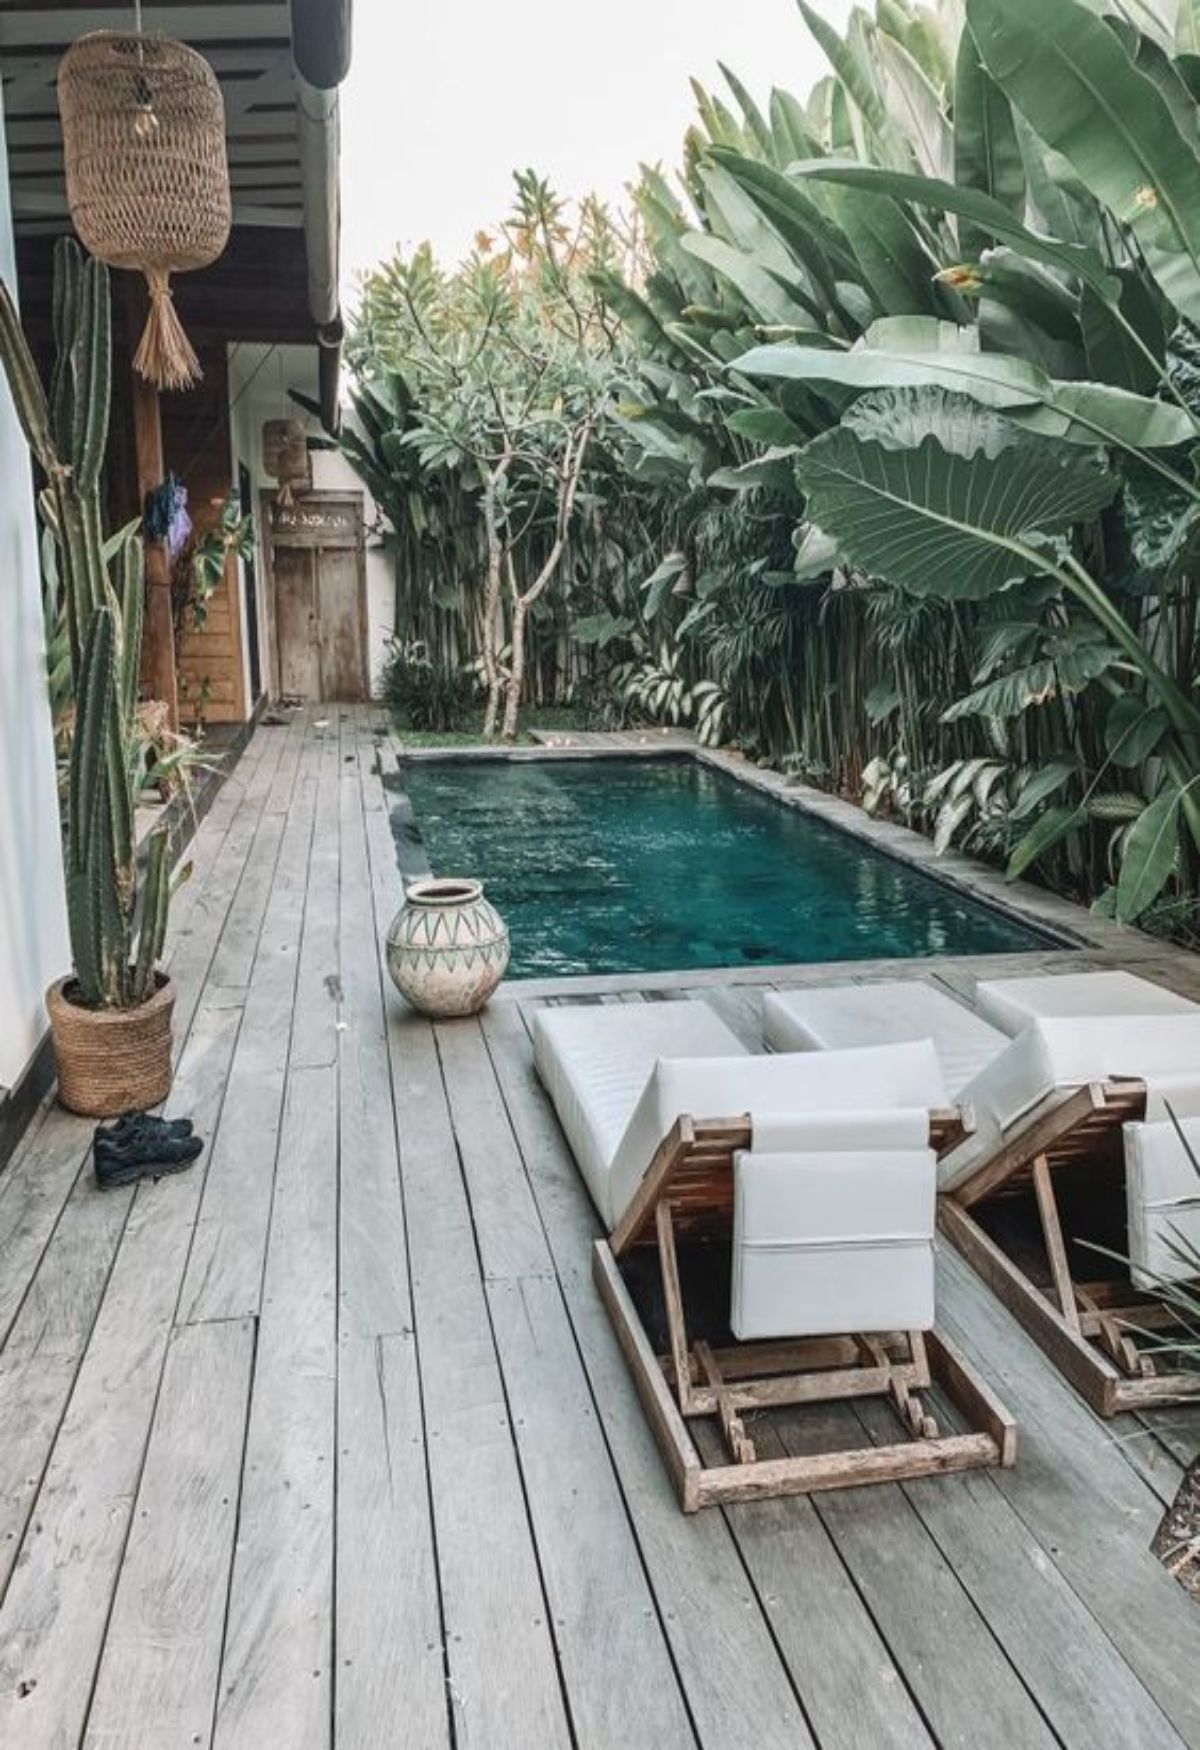 Compact Yet Chic: The Appeal of Small Backyard Pools